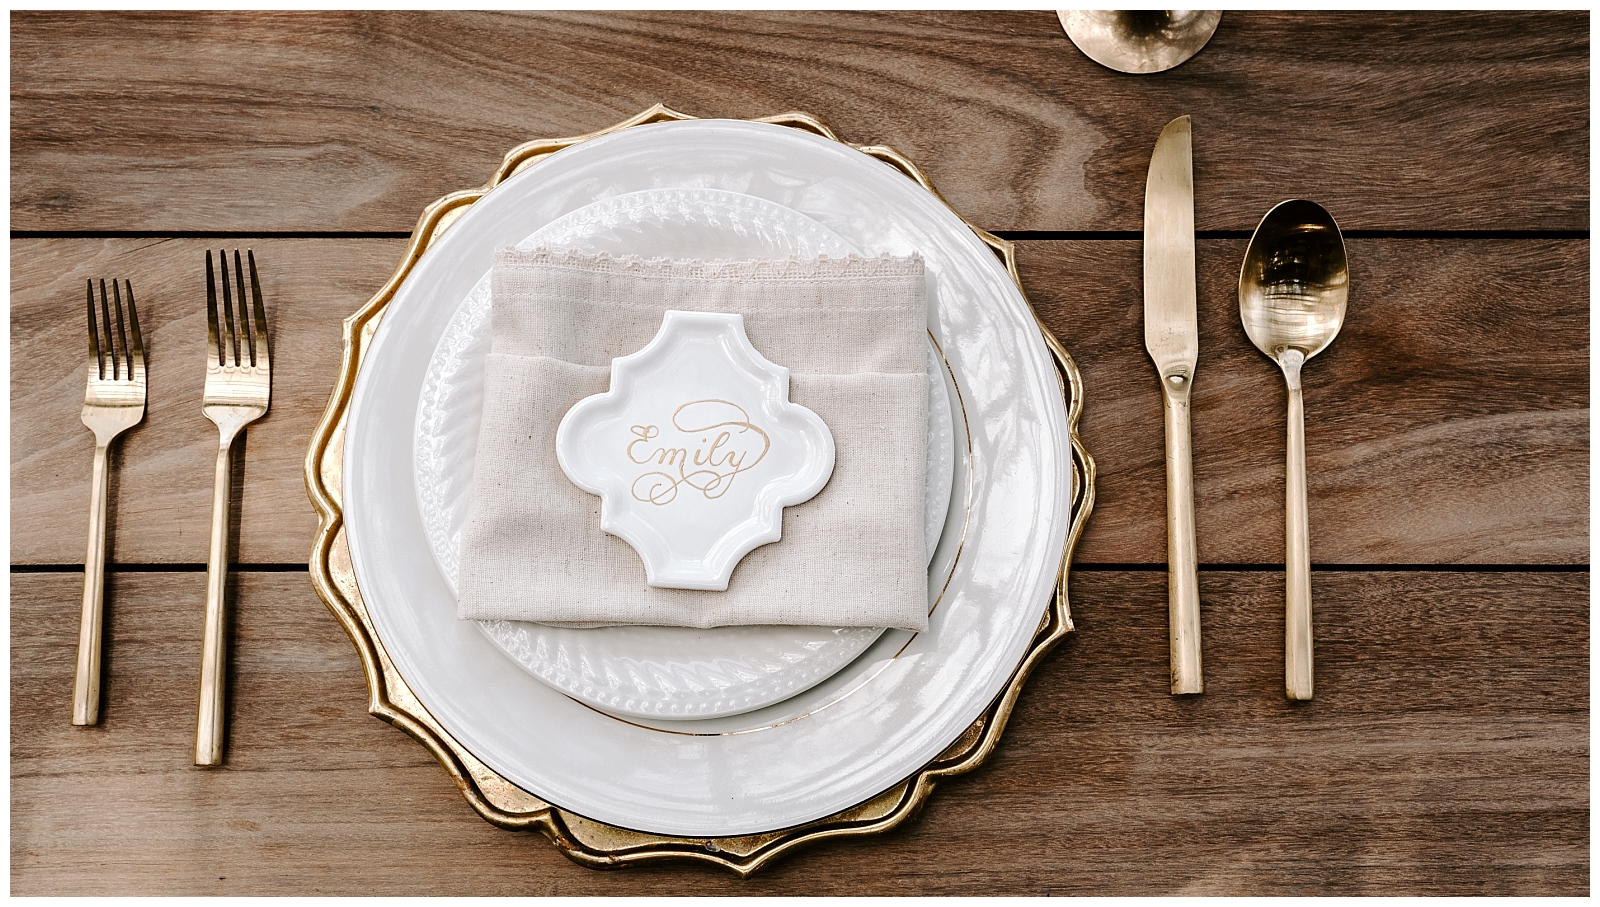 sweet heart table setting for the adventurous couple